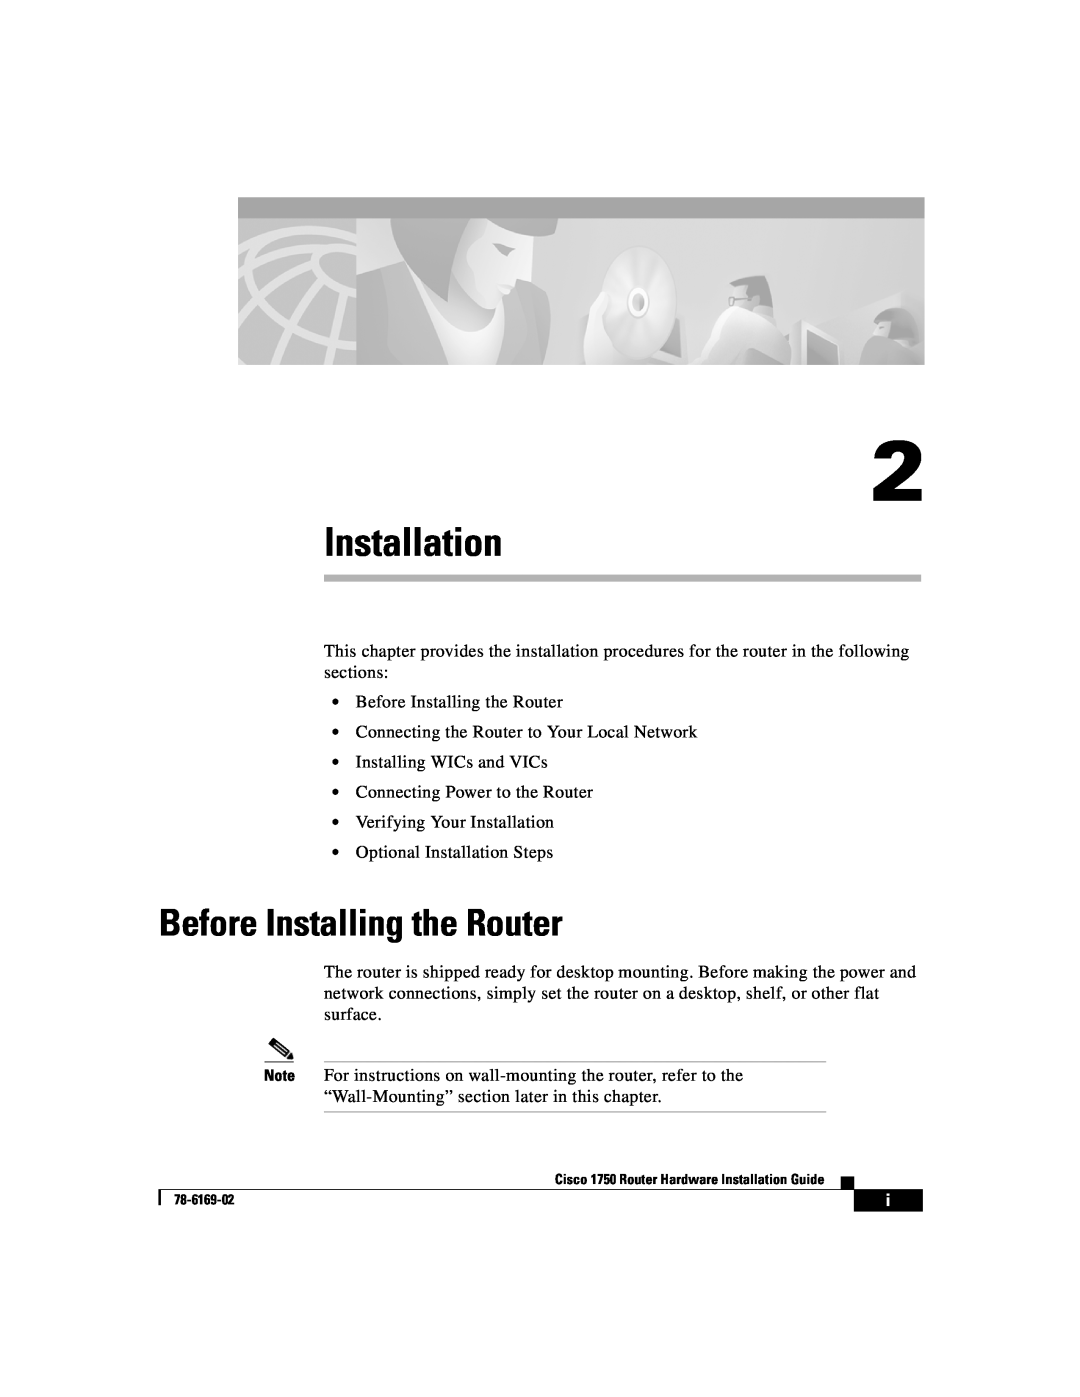 Cisco Systems CISCO1750 manual Installation, Before Installing the Router 